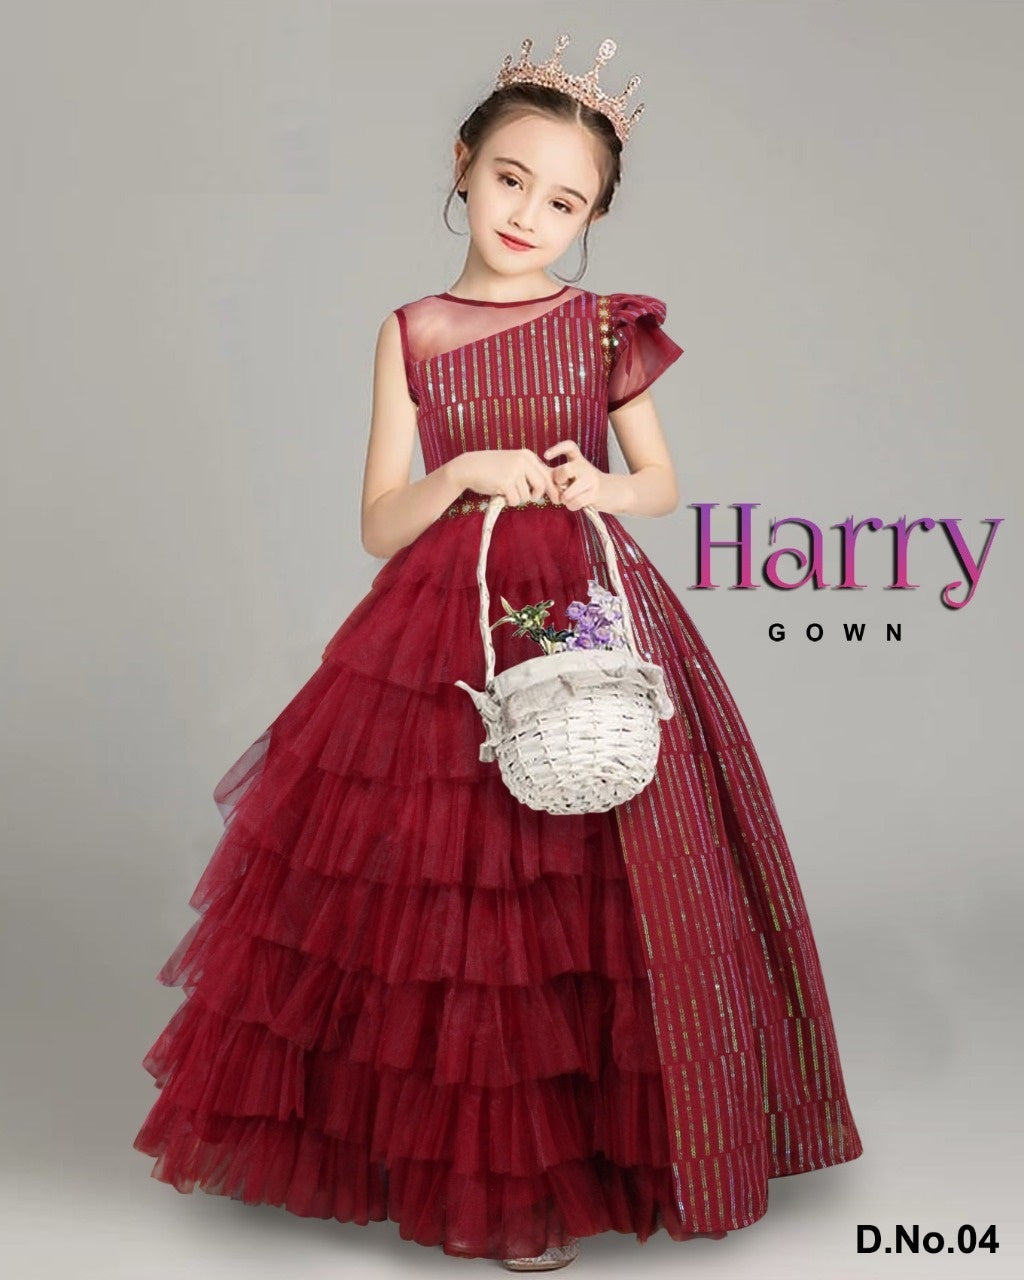 Designer Harry Children Kids Gwon Dno.04 Anant Tex Exports Private Limited